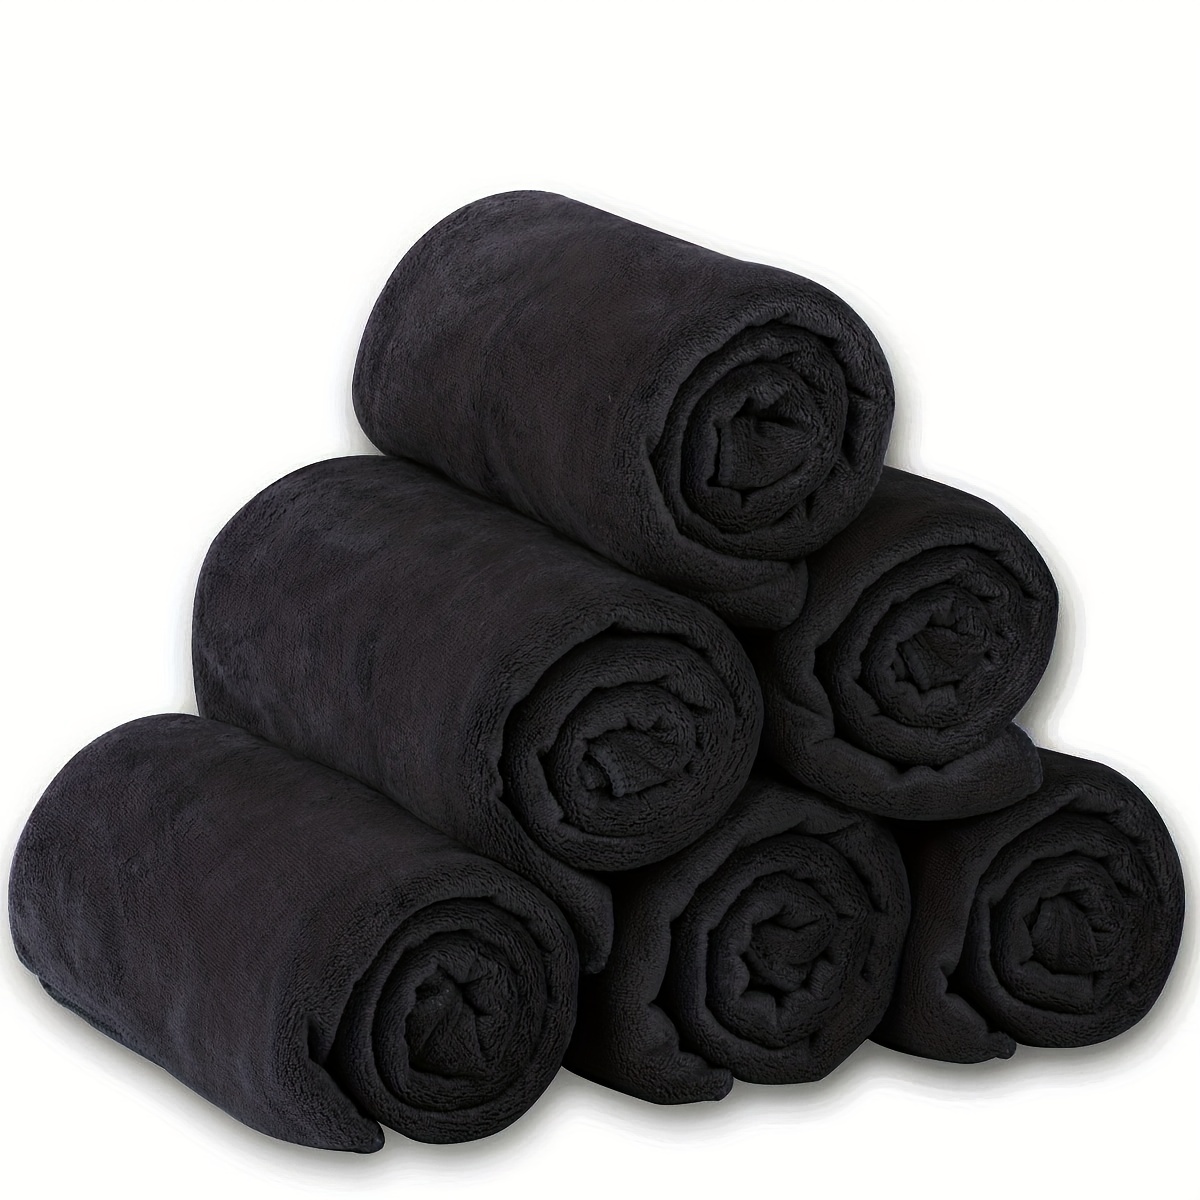 Microfibre Bath Towels  Up to 20% Less Than  Prices